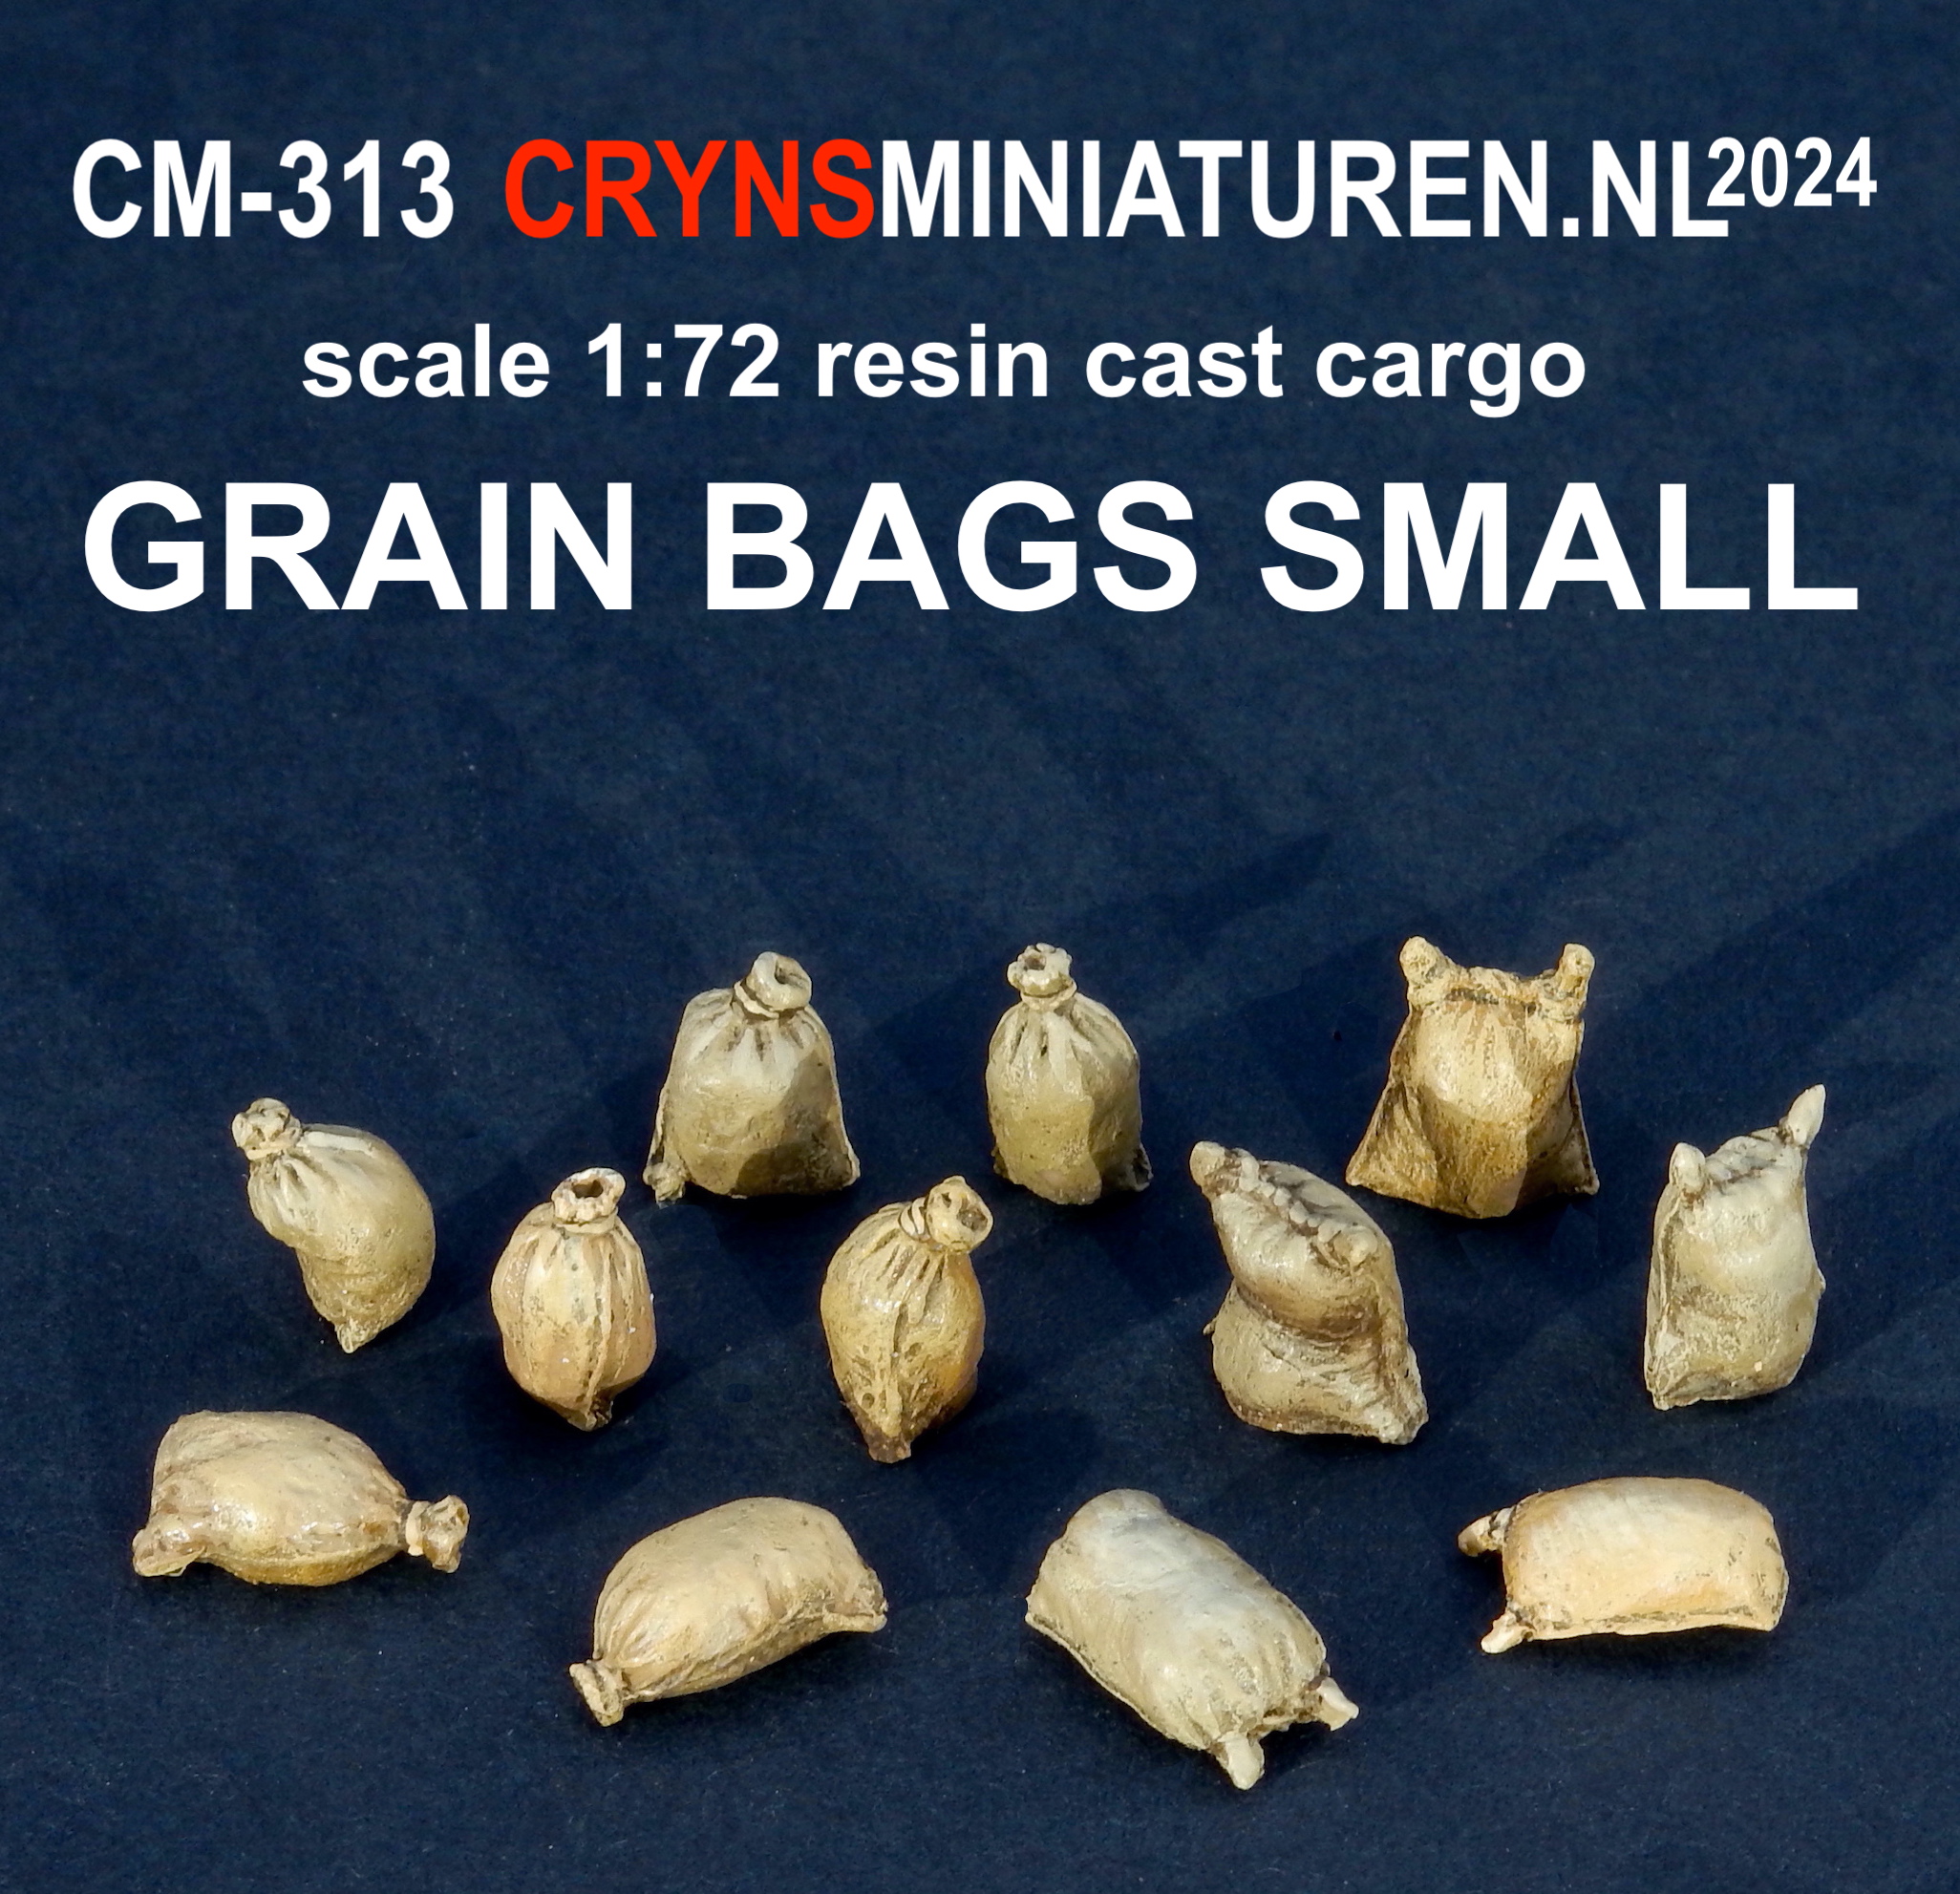 grain bags scale 1:72 miniature cargo and accessories